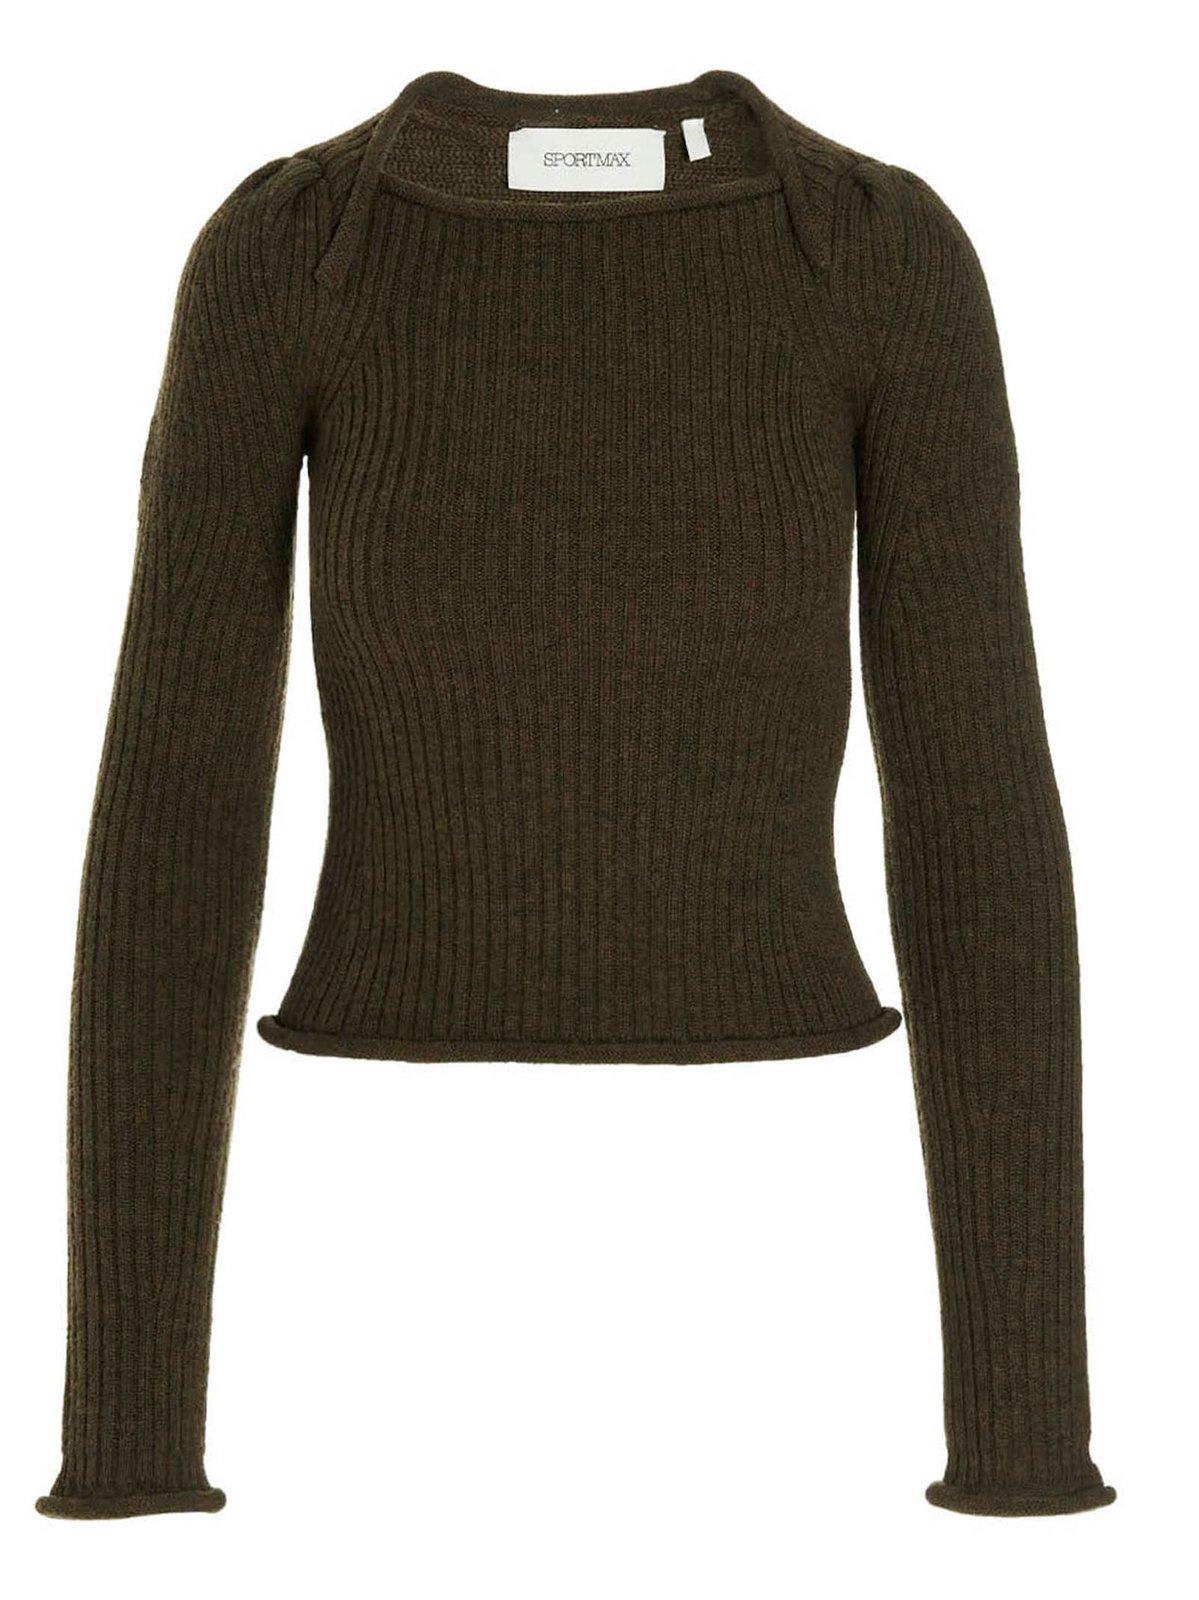 Valico Long-sleeved Sweater SportMax